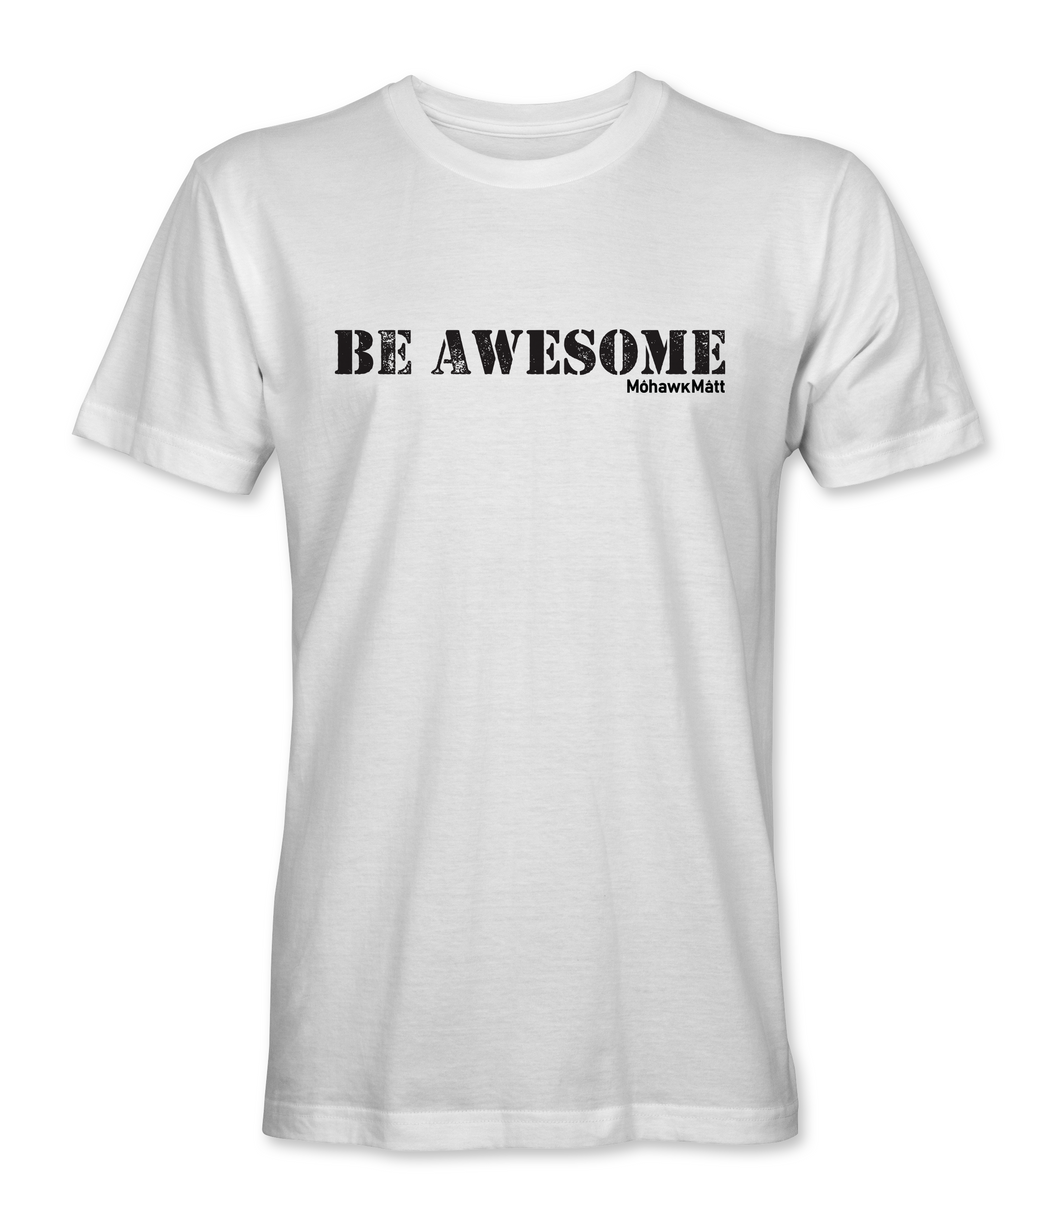 Be Awesome T-Shirt in Black or White